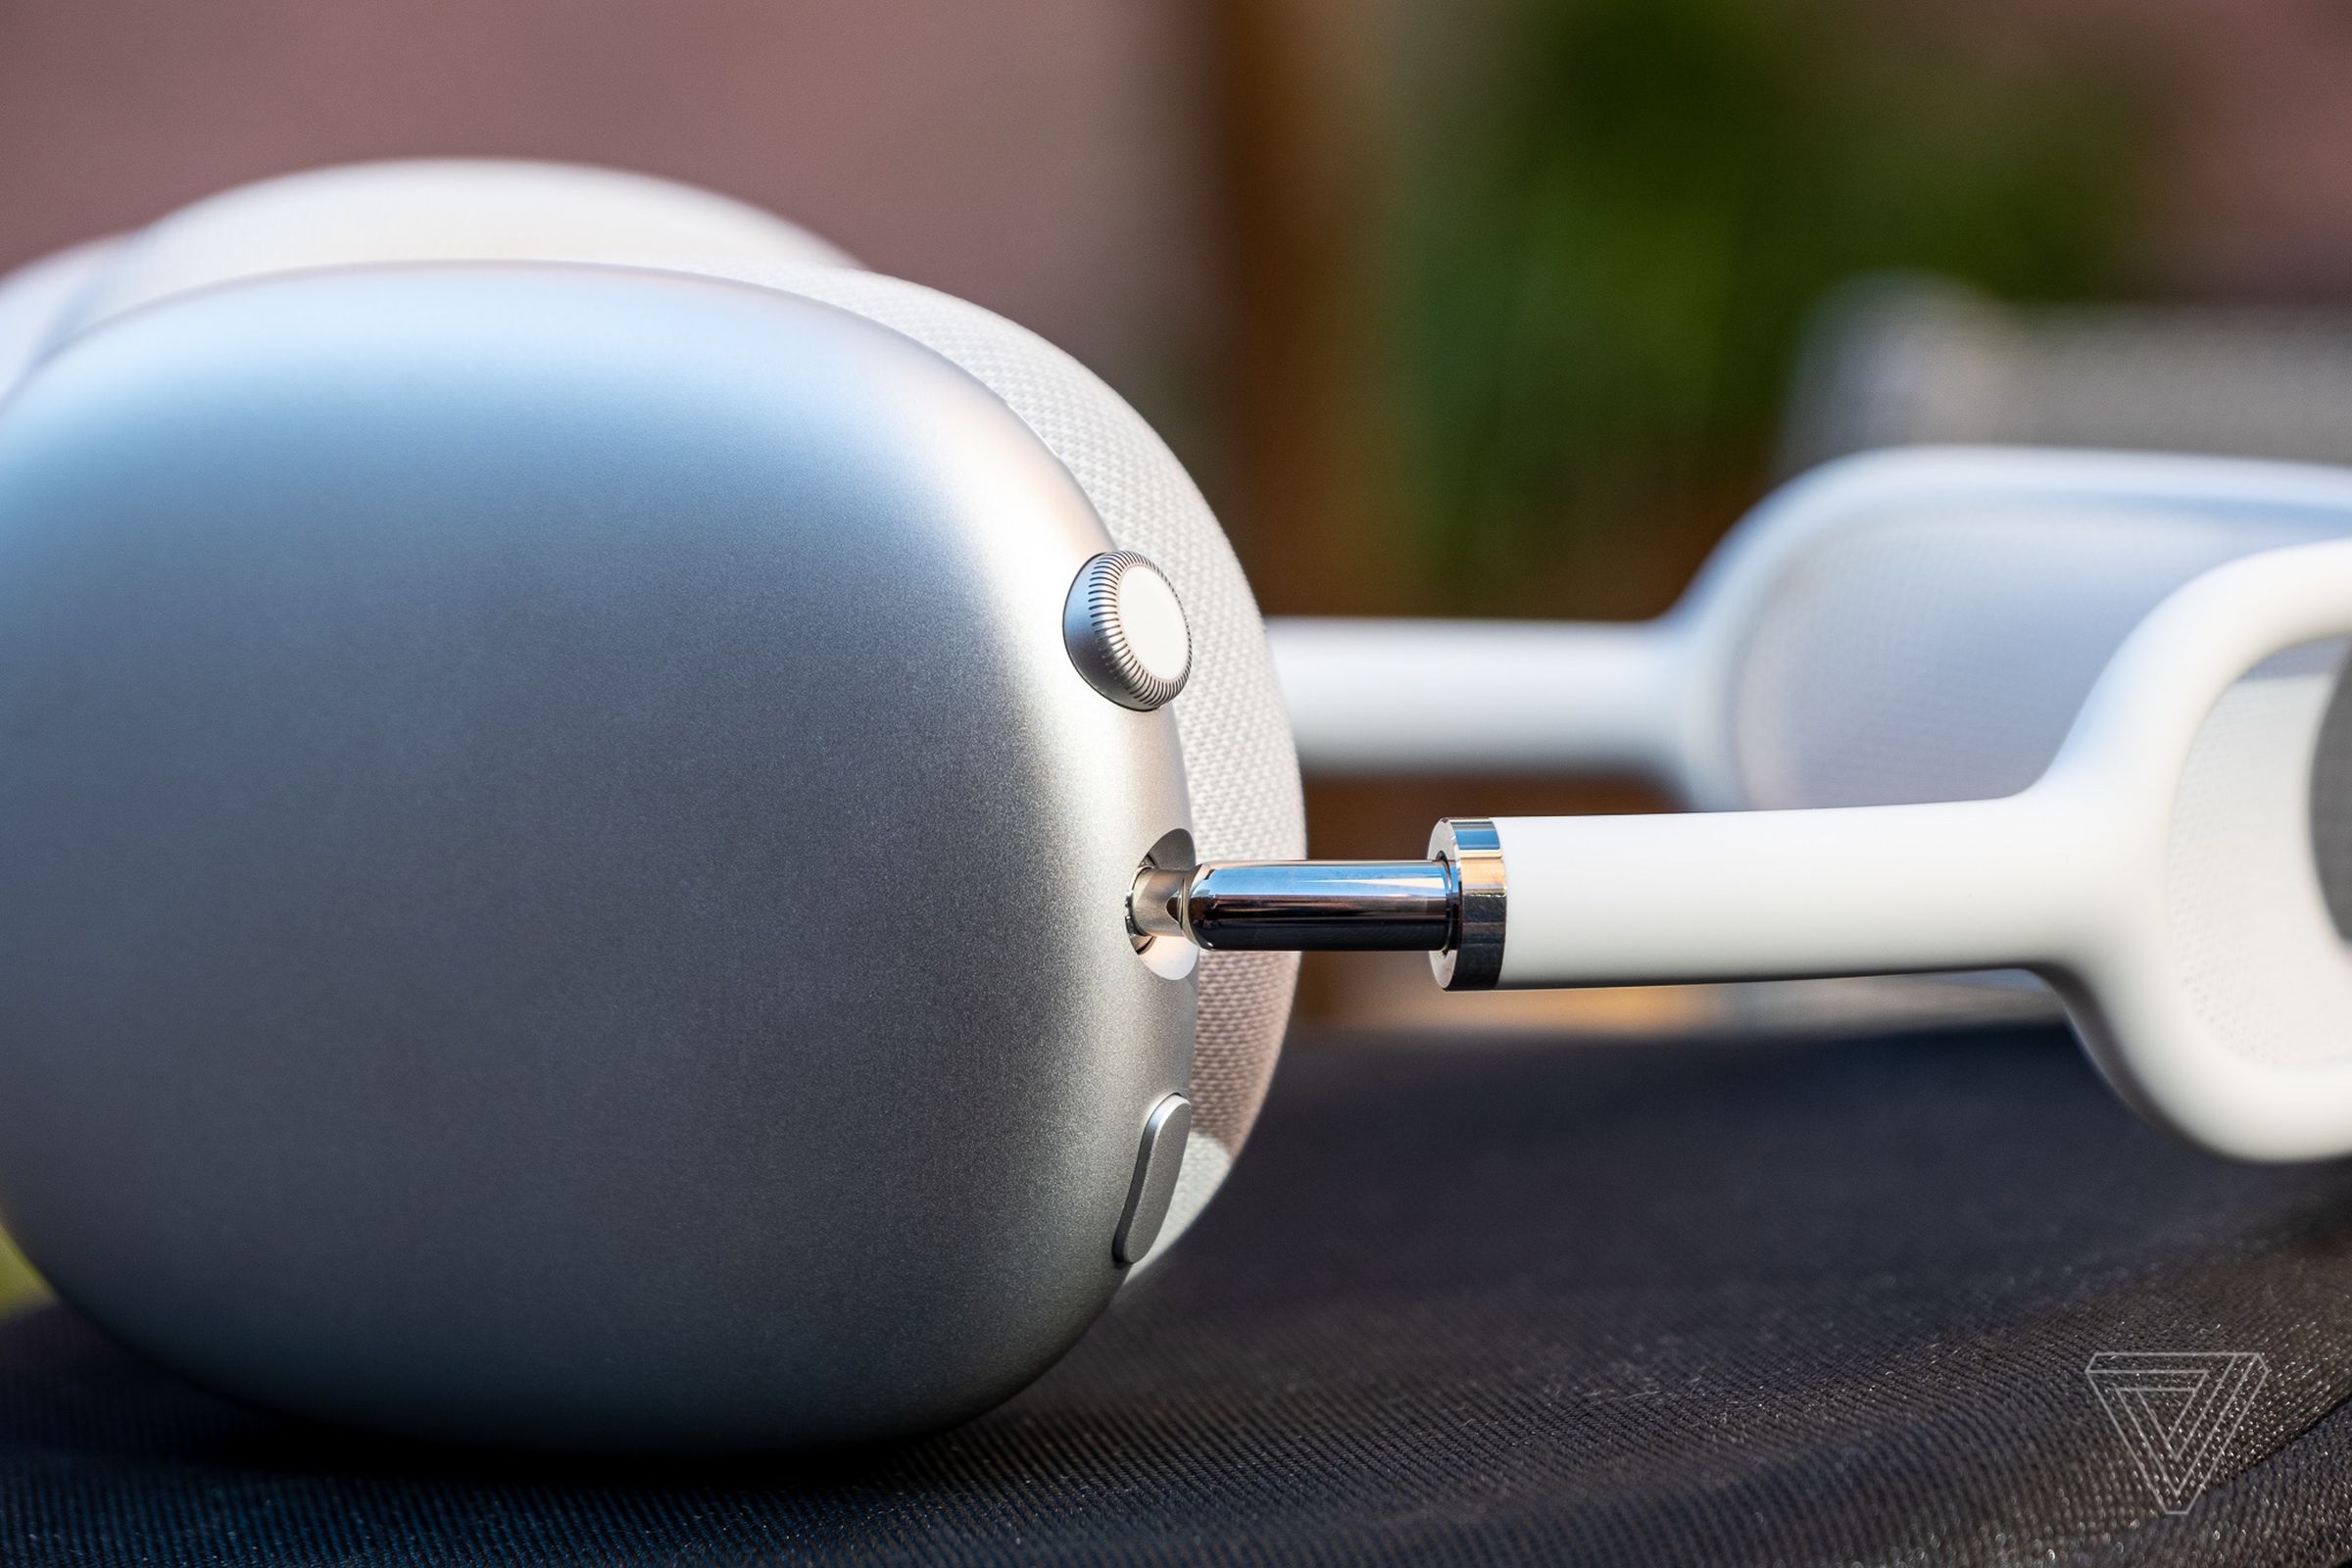 A close-up of the Digital Crown on Apple's silver AirPods Max headphones.